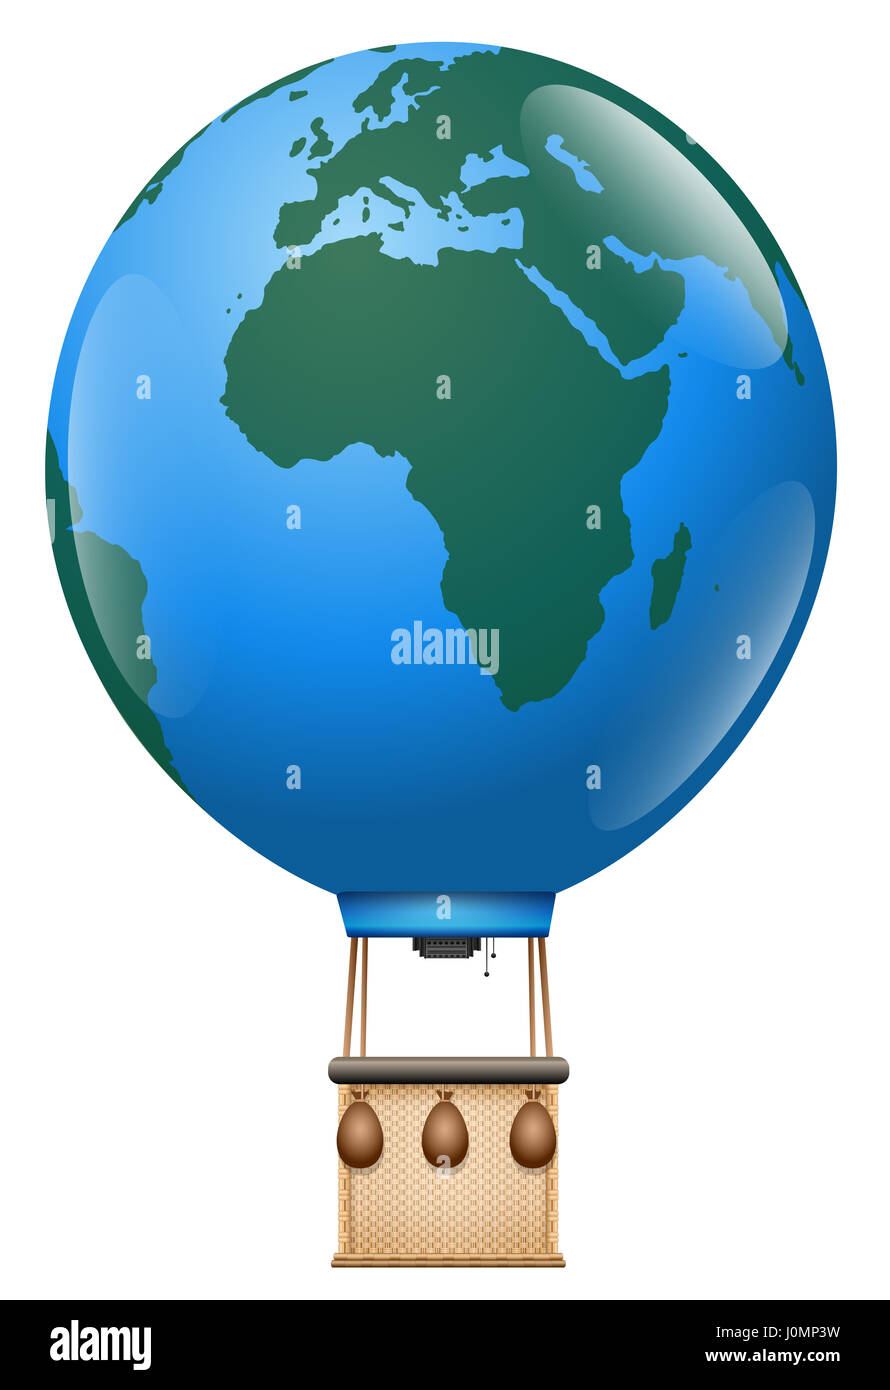 Europe Africa Trip - hot air balloon tour with planet earth balloon and vintage basket around the world - isolated illustration on white background Stock Photo